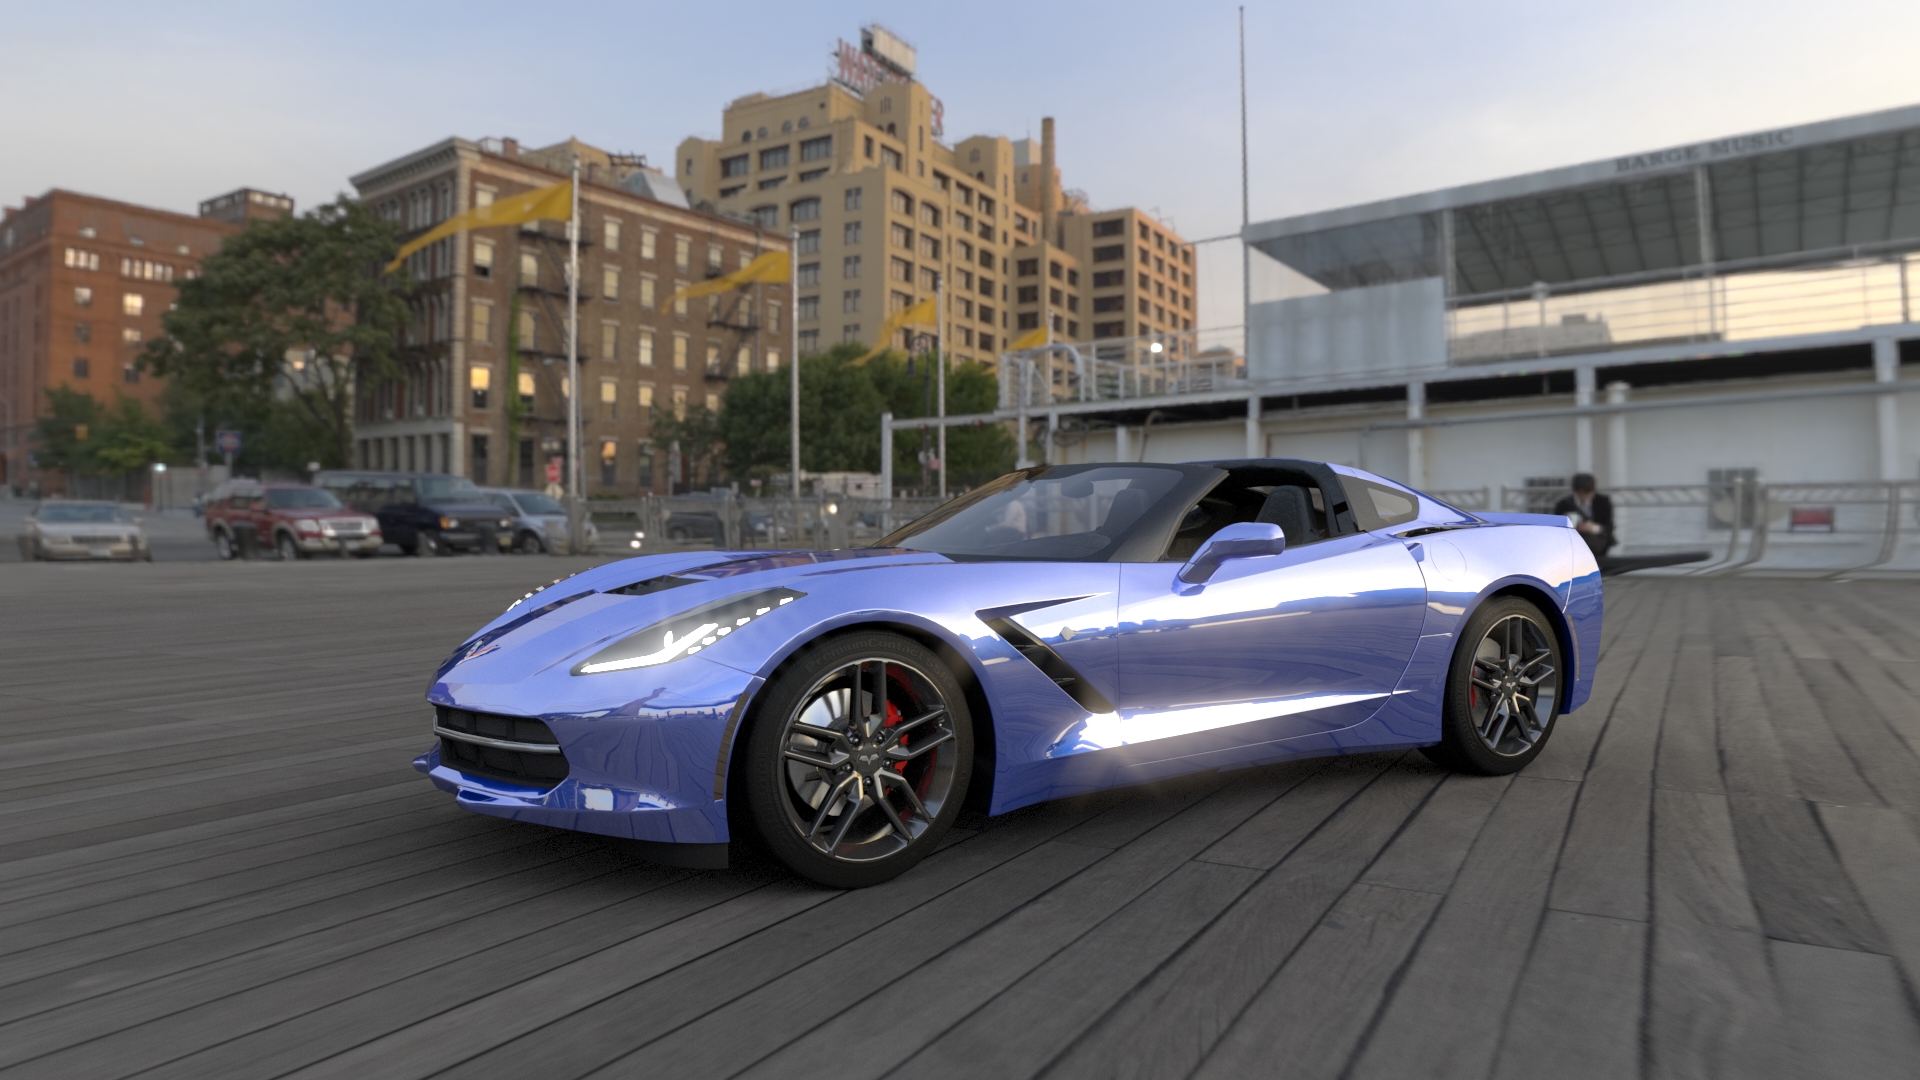 Index of /wp-content/gallery/2014_chevrolet_corvette_stingray_vred.